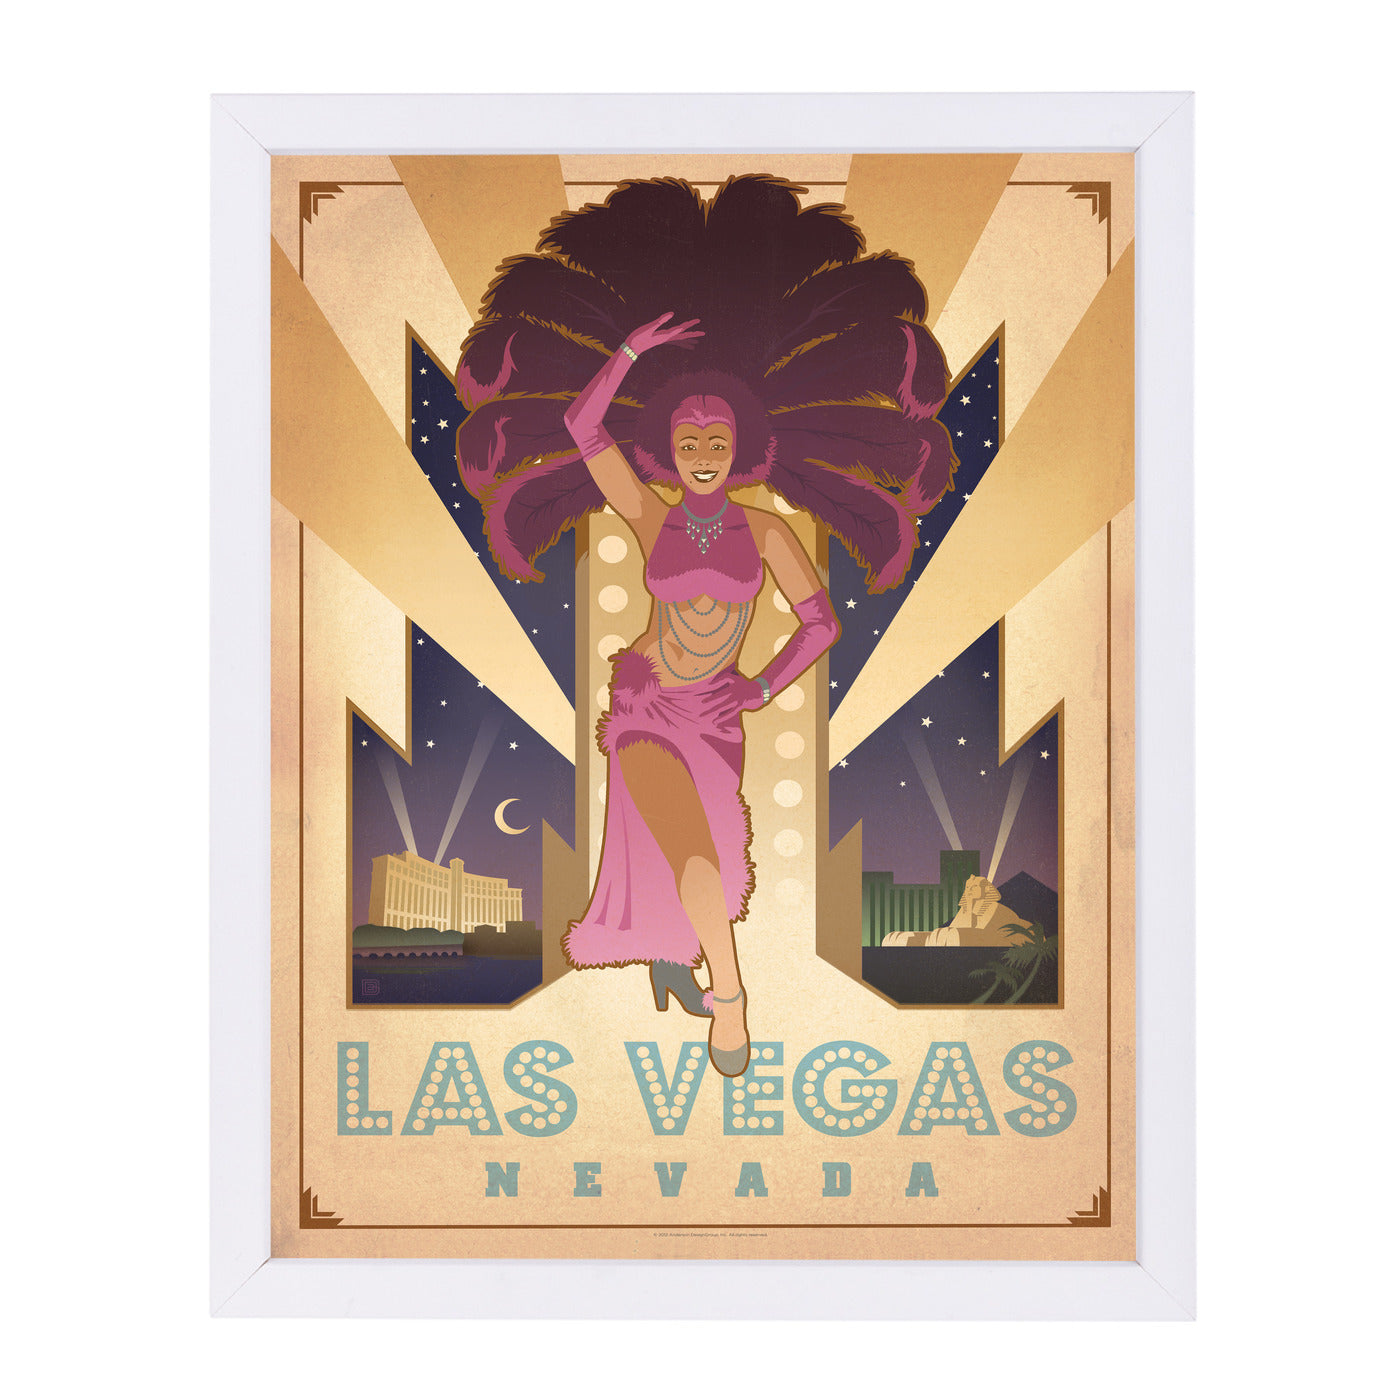 Las Vegas Showgirl by Anderson Design Group Framed Print - Americanflat